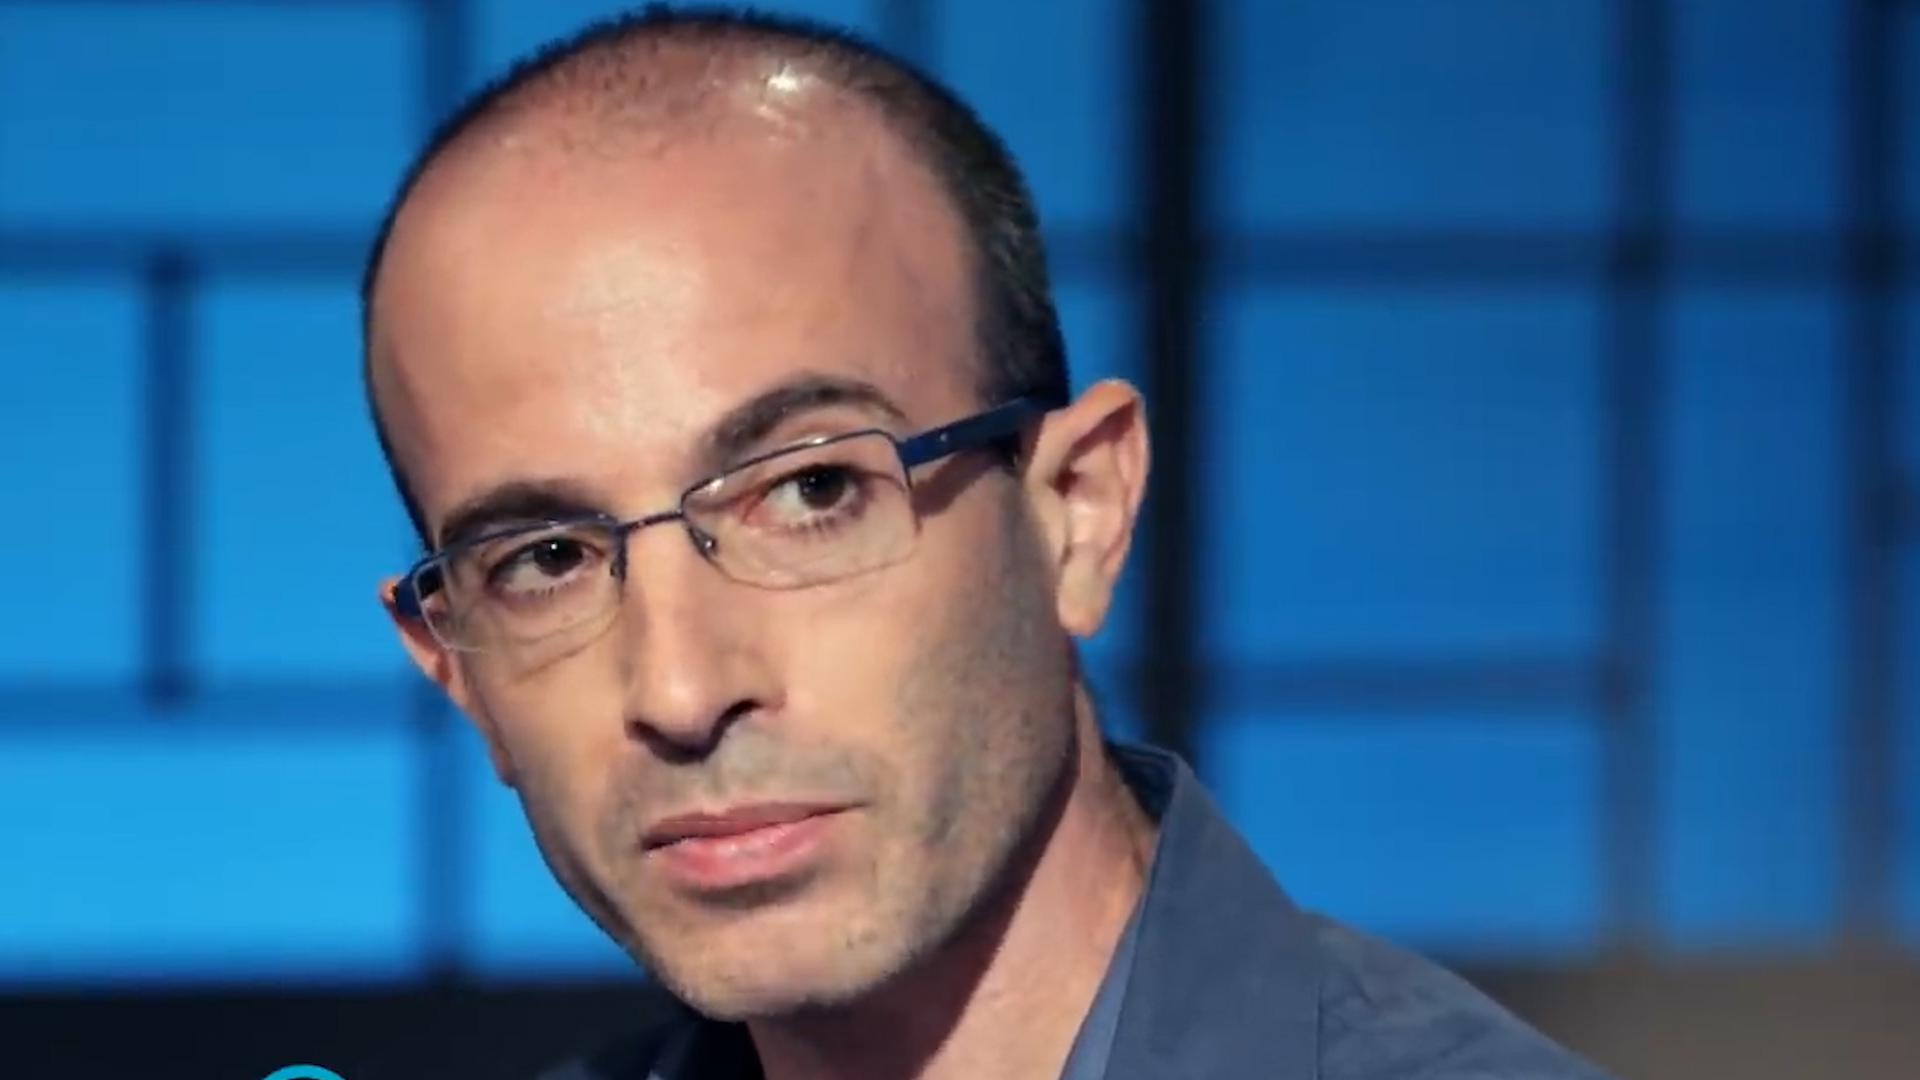 Yuval Noah Harari warned that the world is experiencing the most dangerous moment since the Cuban nuclear missile crisis